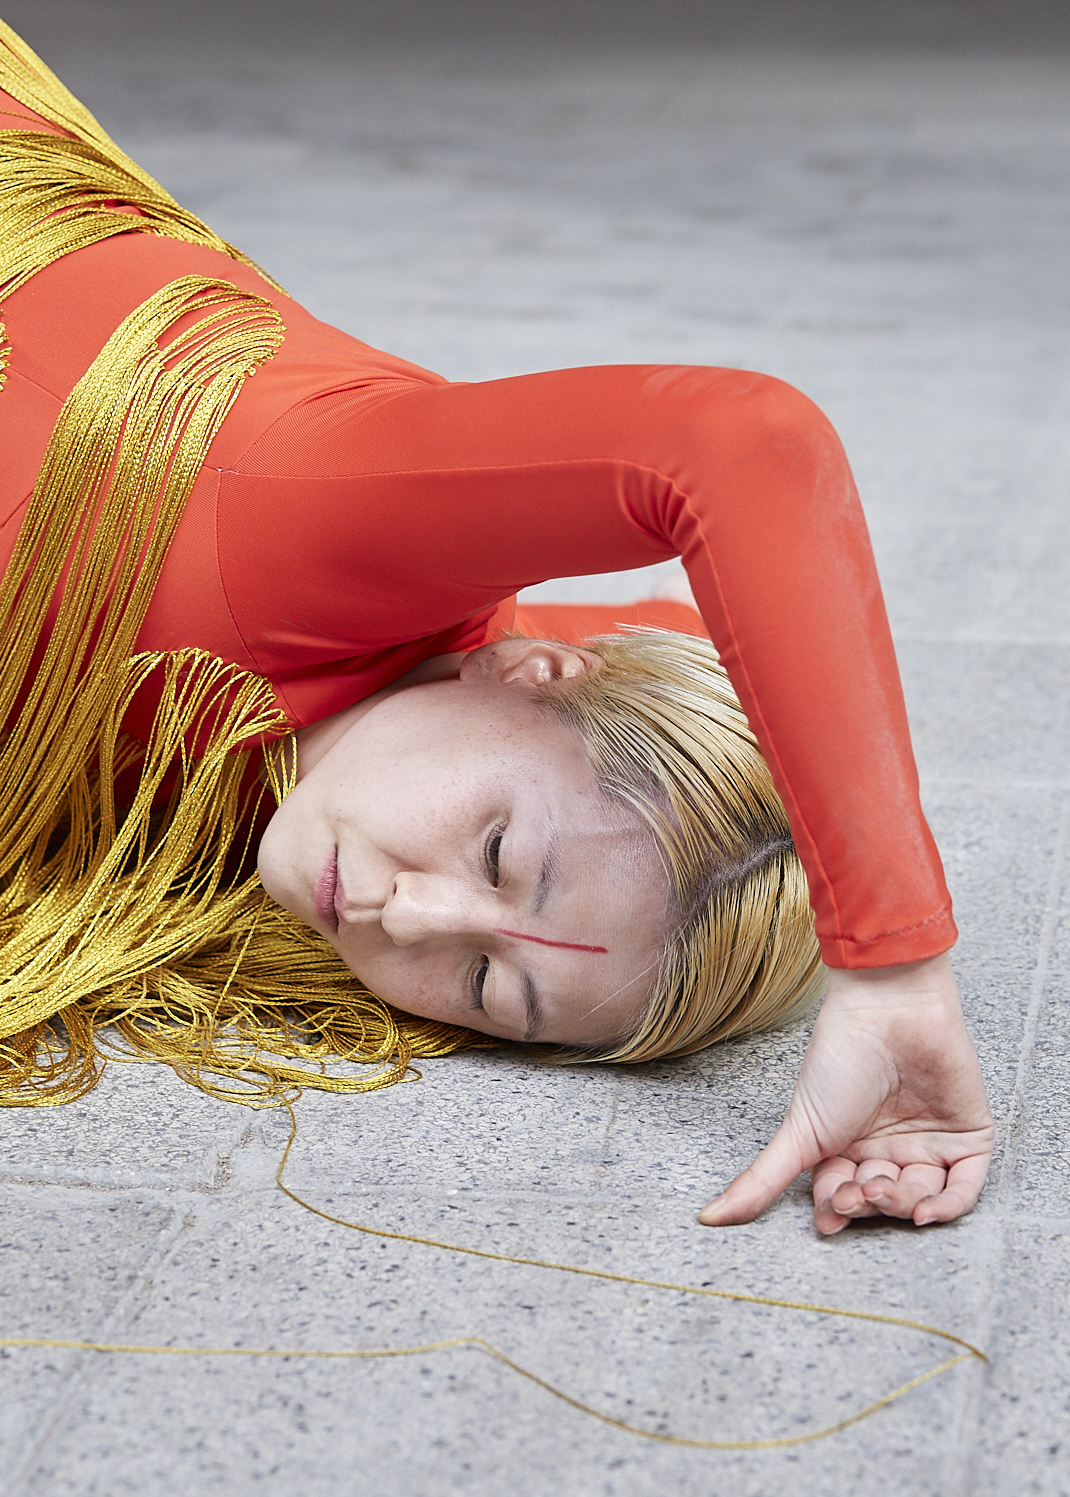 Performance for 'Scent from Heaven' project by Hien Hoang, featuring dancer Moe Gotoda. The performance uses dance, movement, and recorded geosonic sound to interpret the birth of agarwood as a child born from the pain and suffering of its parent tree.